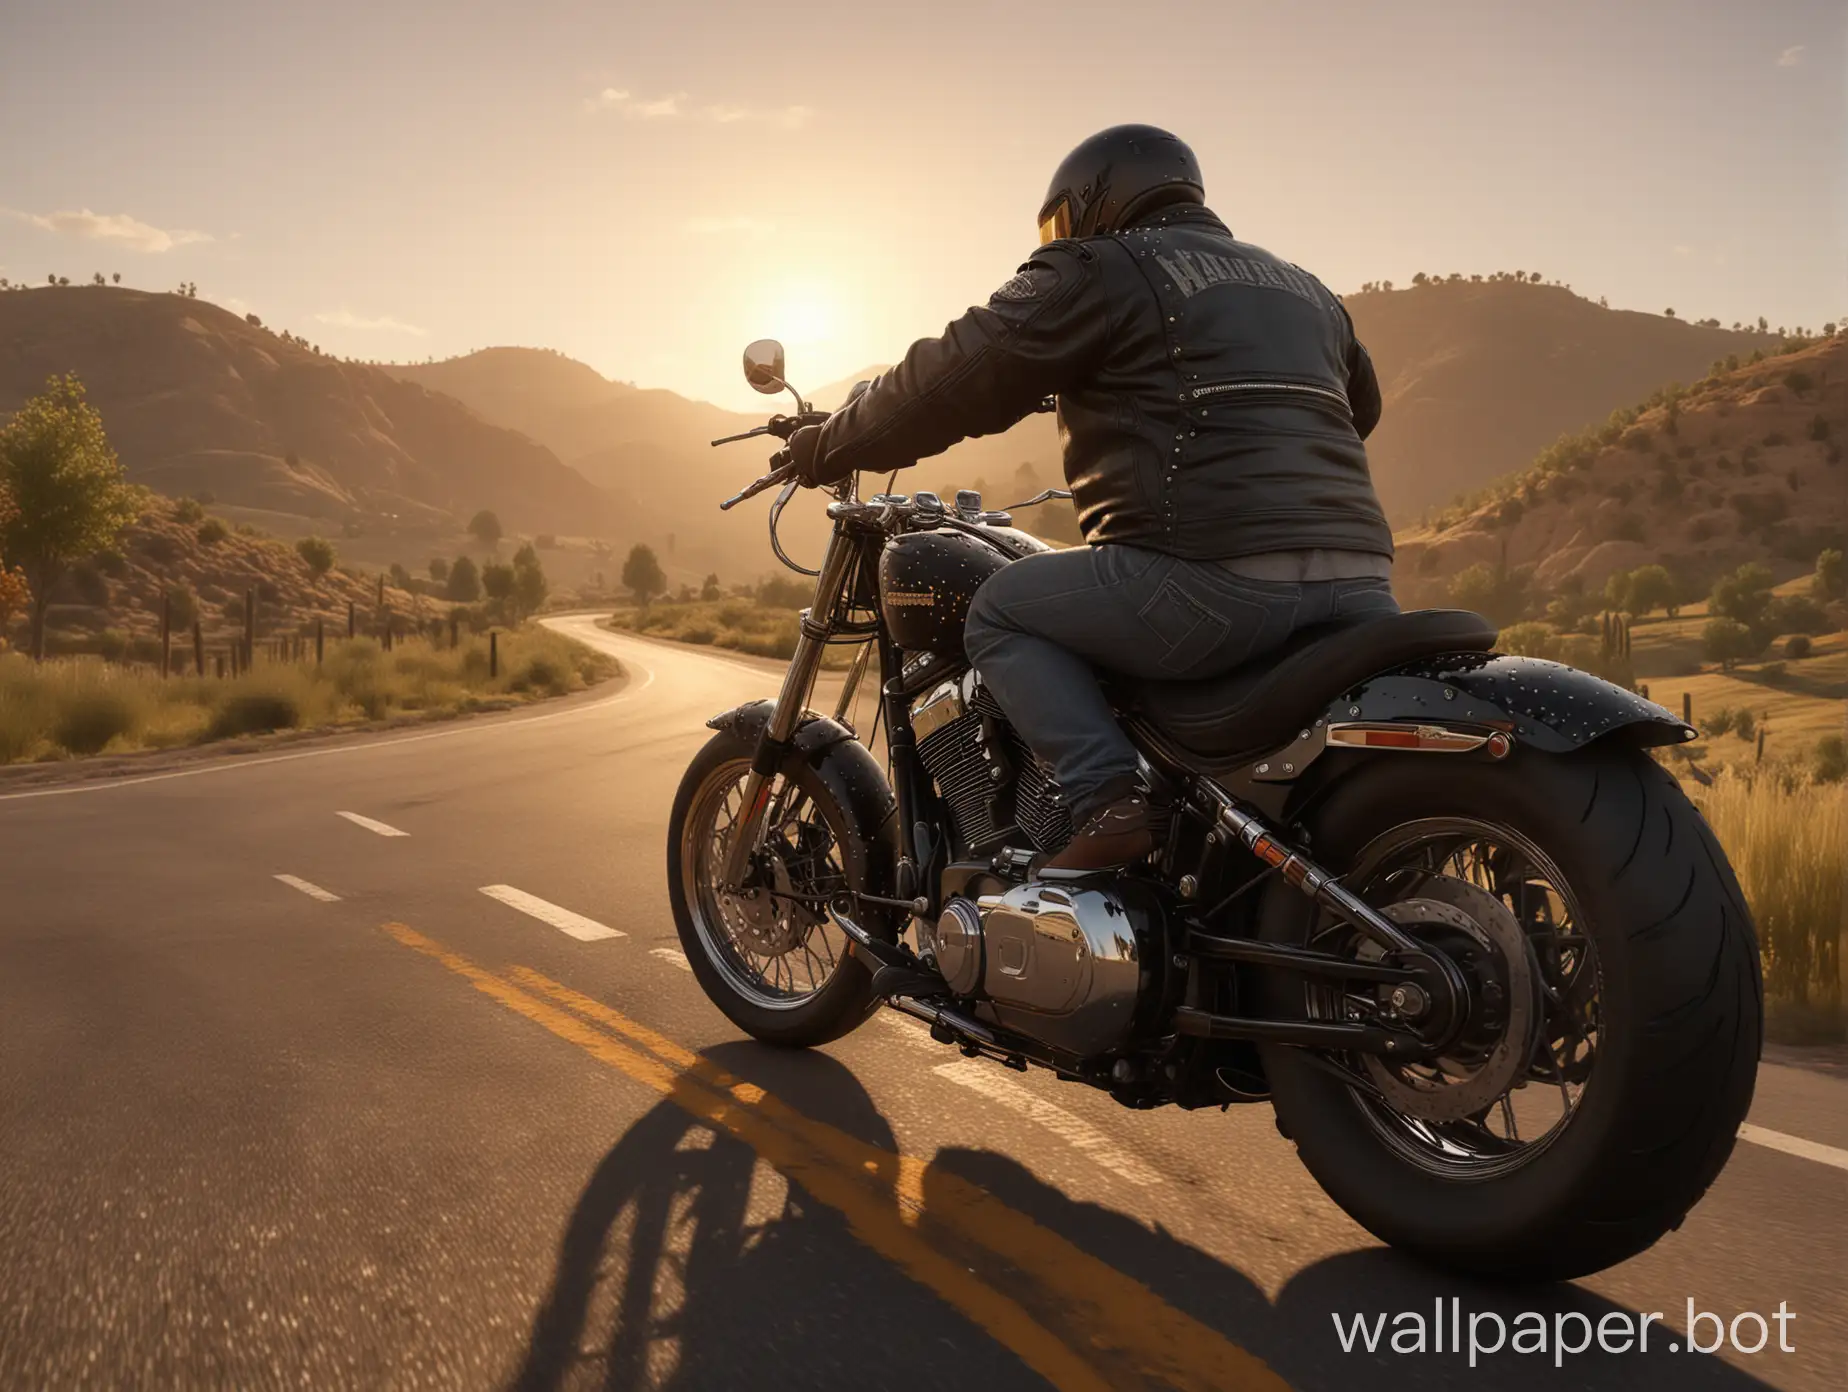 A striking, highly detailed 3D render of an overweight biker clad in a black studded leather jacket, riding his powerful Harley Davidson motorcycle through the picturesque countryside. The bike roars to life as the sun sets behind rolling hills, casting a warm golden light on the scene. The biker's intense gaze and gritted teeth showcase his fierce determination. The view is from the front, immersing the viewer in the cinematic moment.